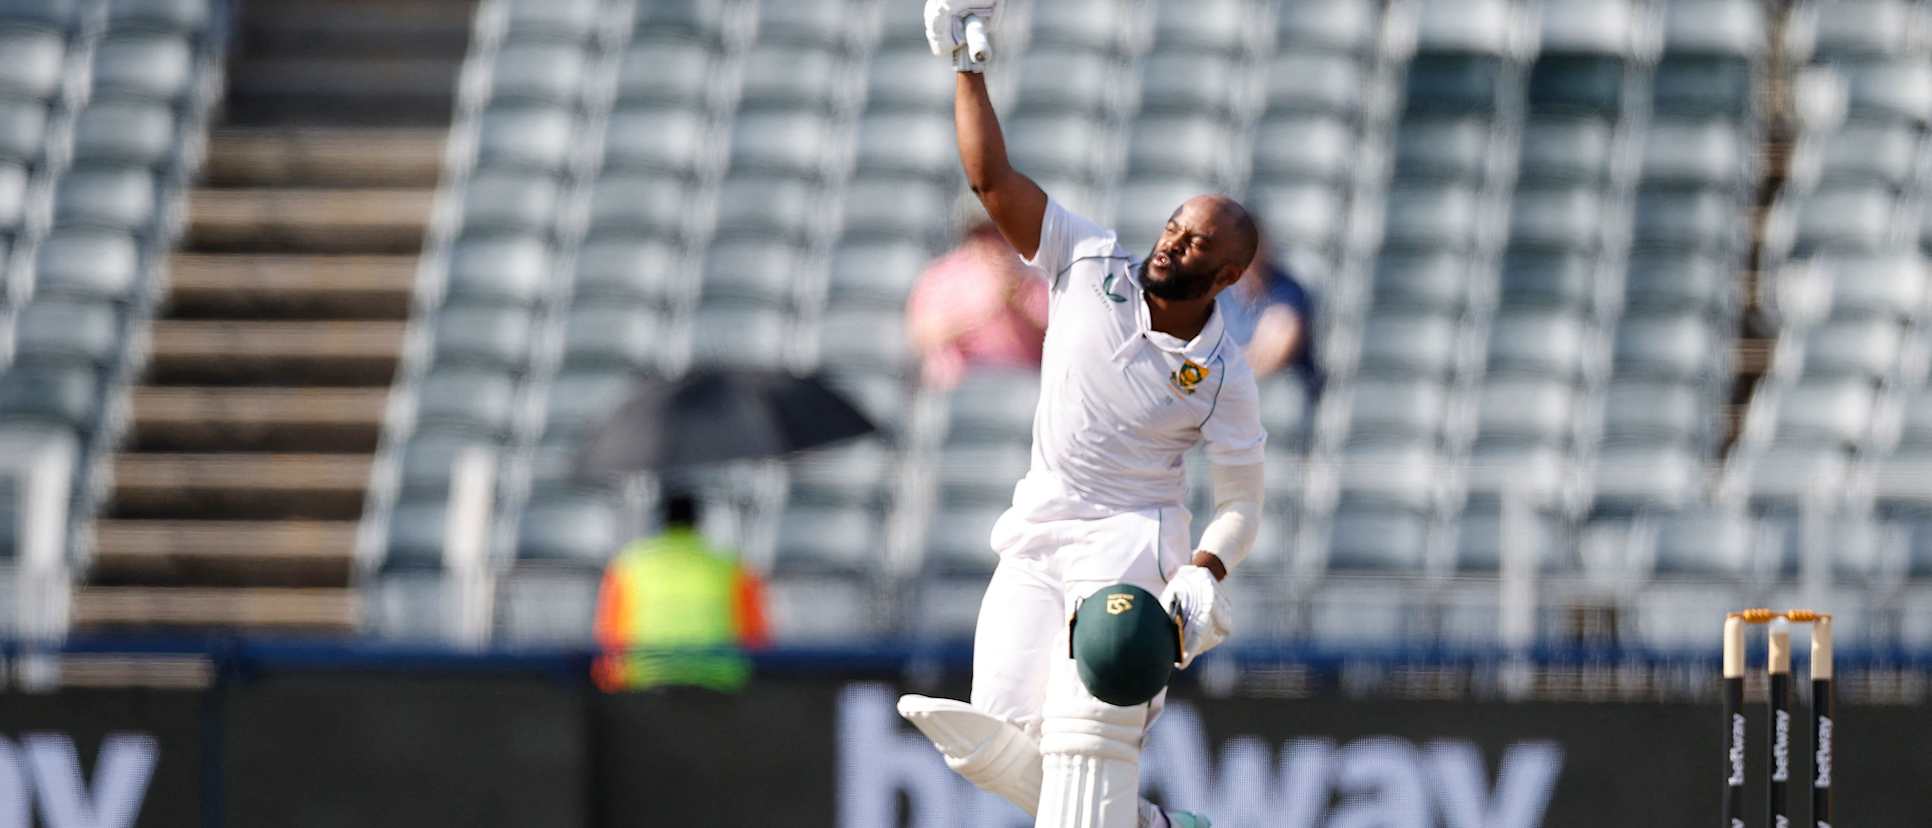 Temba Bavuma will lead South Africa in the Test series